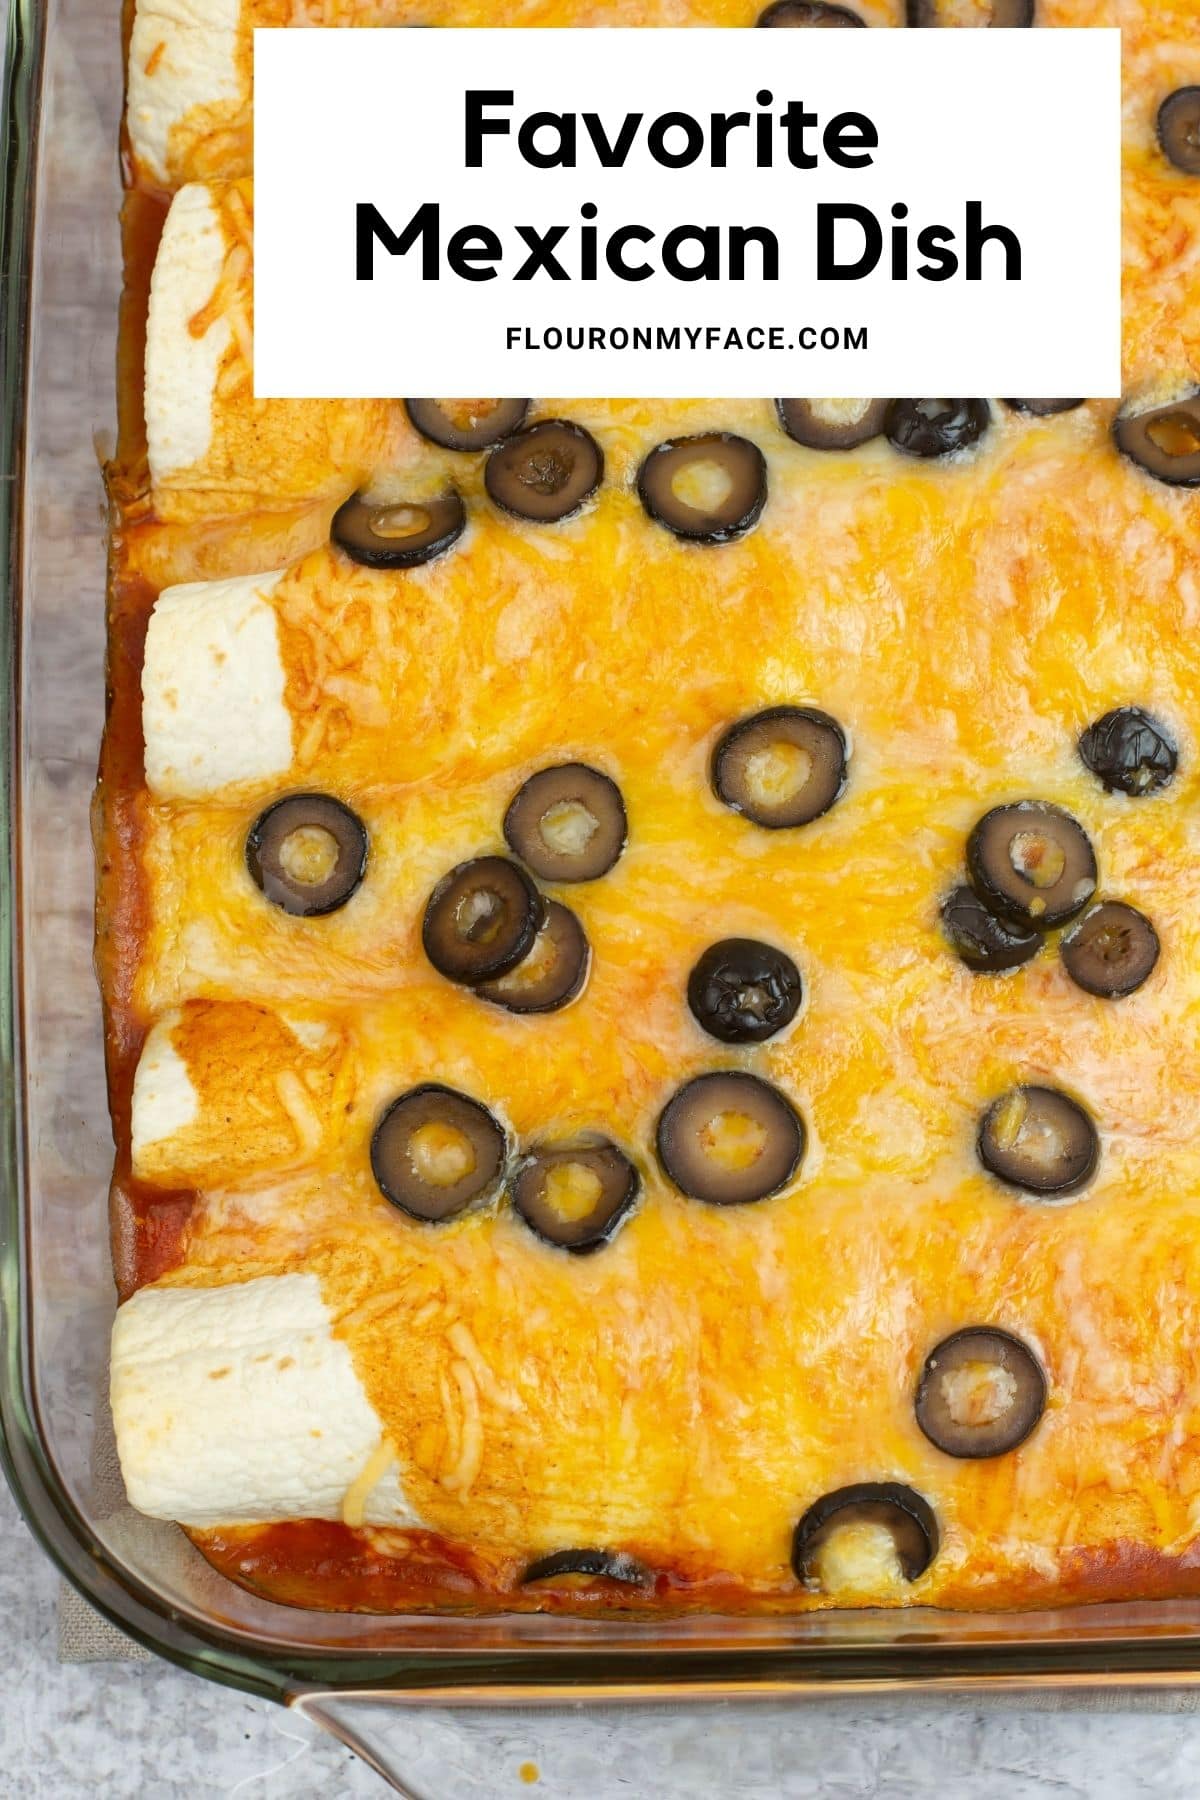 Long vertical image of a tray of baked enchiladas.